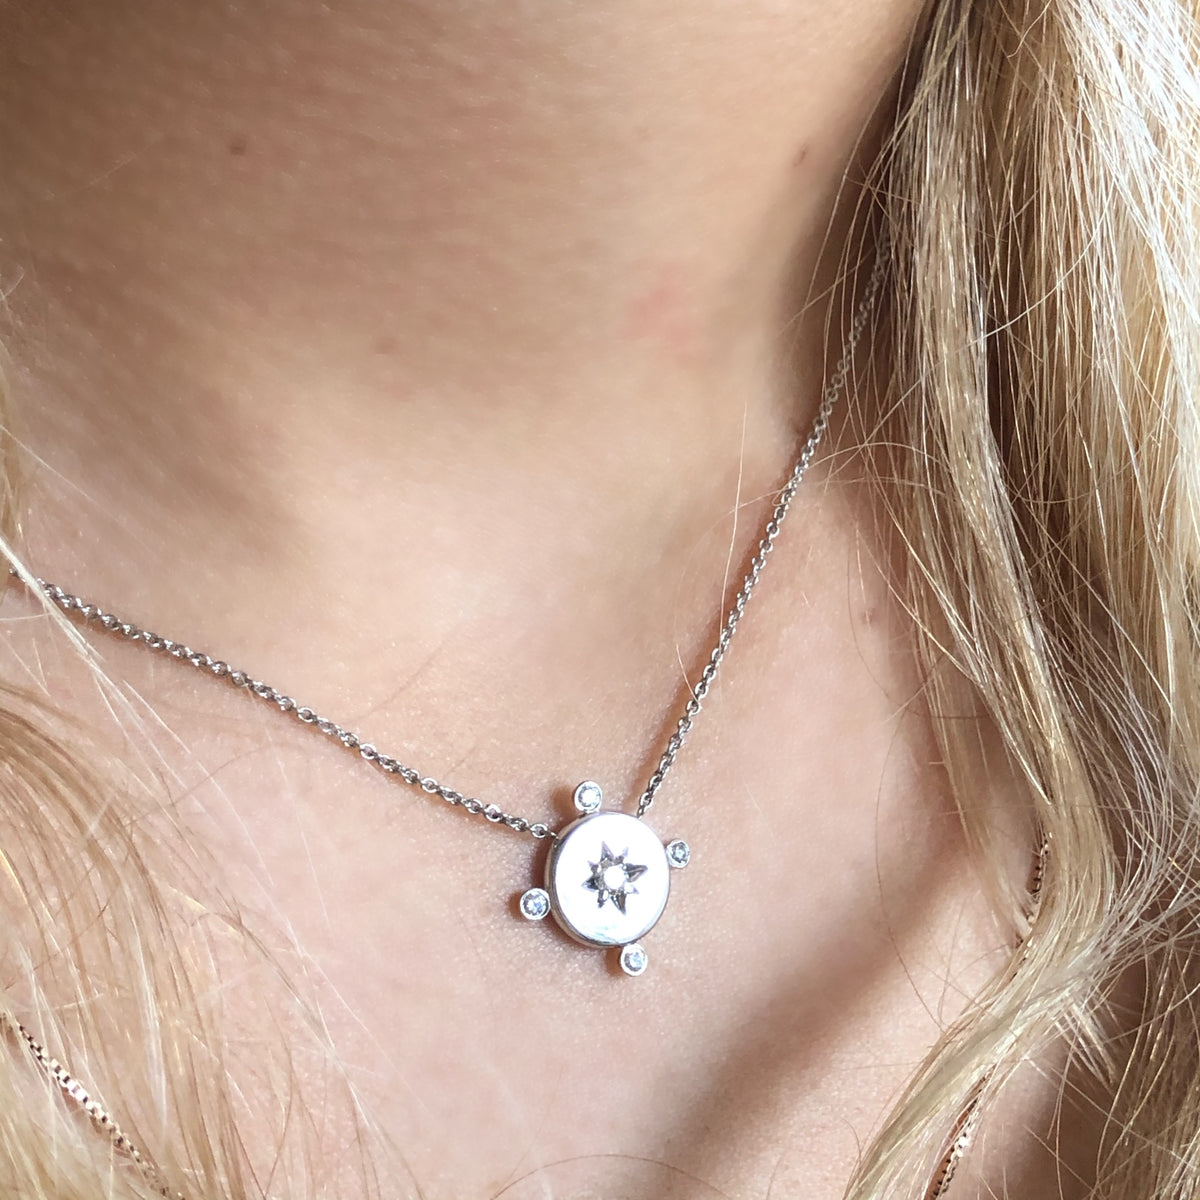 WHITE GOLD DIAMOND LUCKY STAR COMPASS NECKLACE